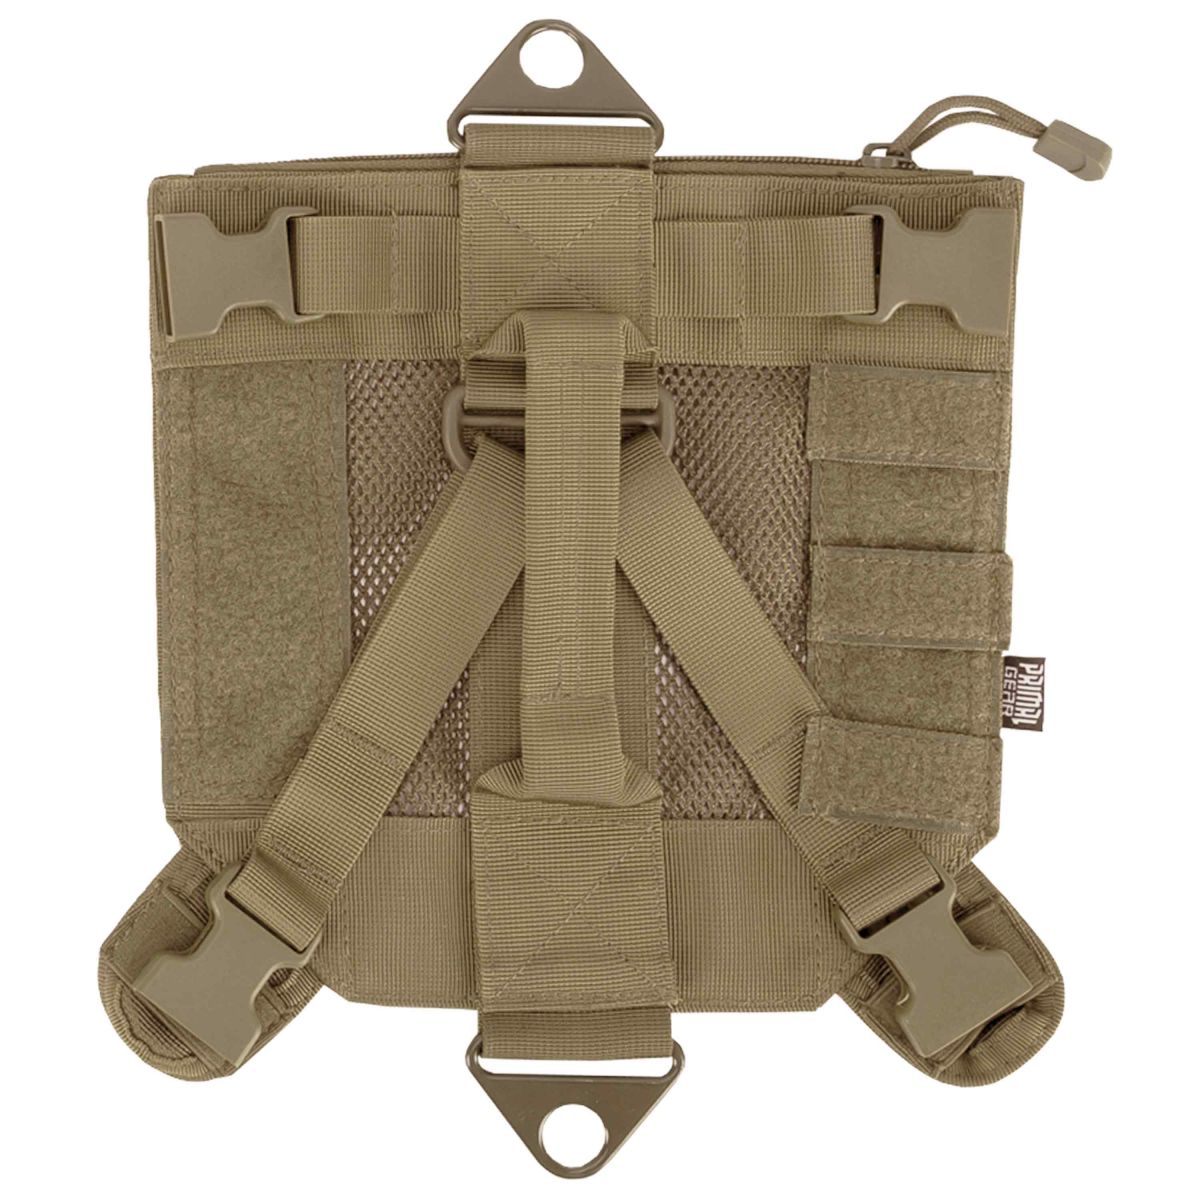 Purchase the Primal Gear Tactical Dog Harness tan by ASMC